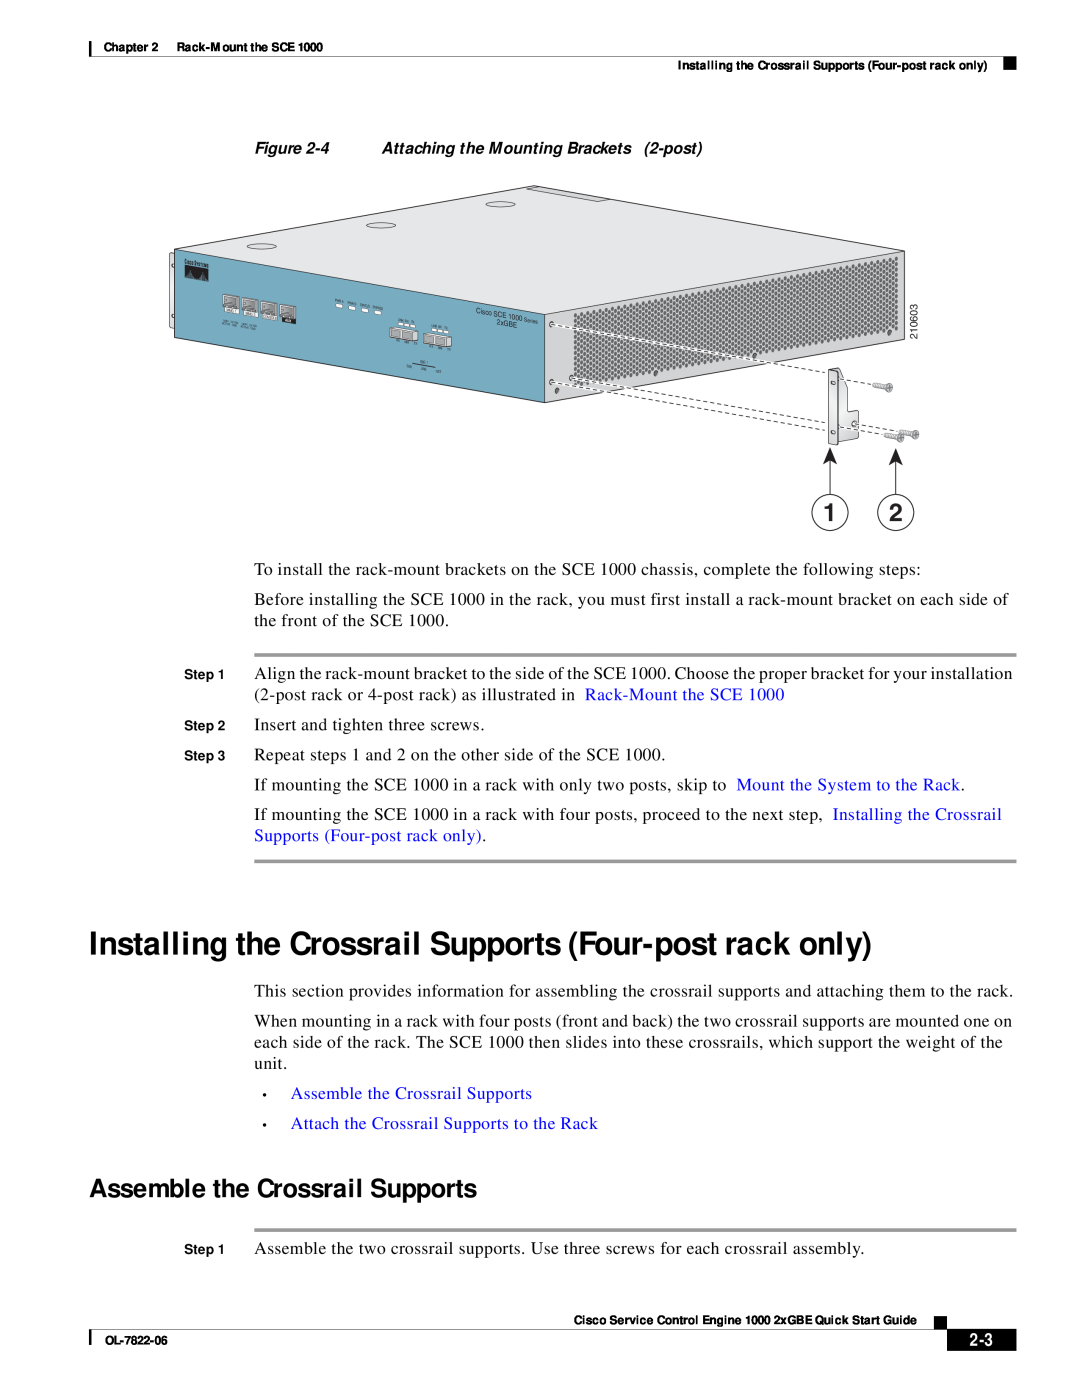 Cisco Systems OL-7822-06 quick start Installing the Crossrail Supports Four-post rack only, Assemble the Crossrail Supports 